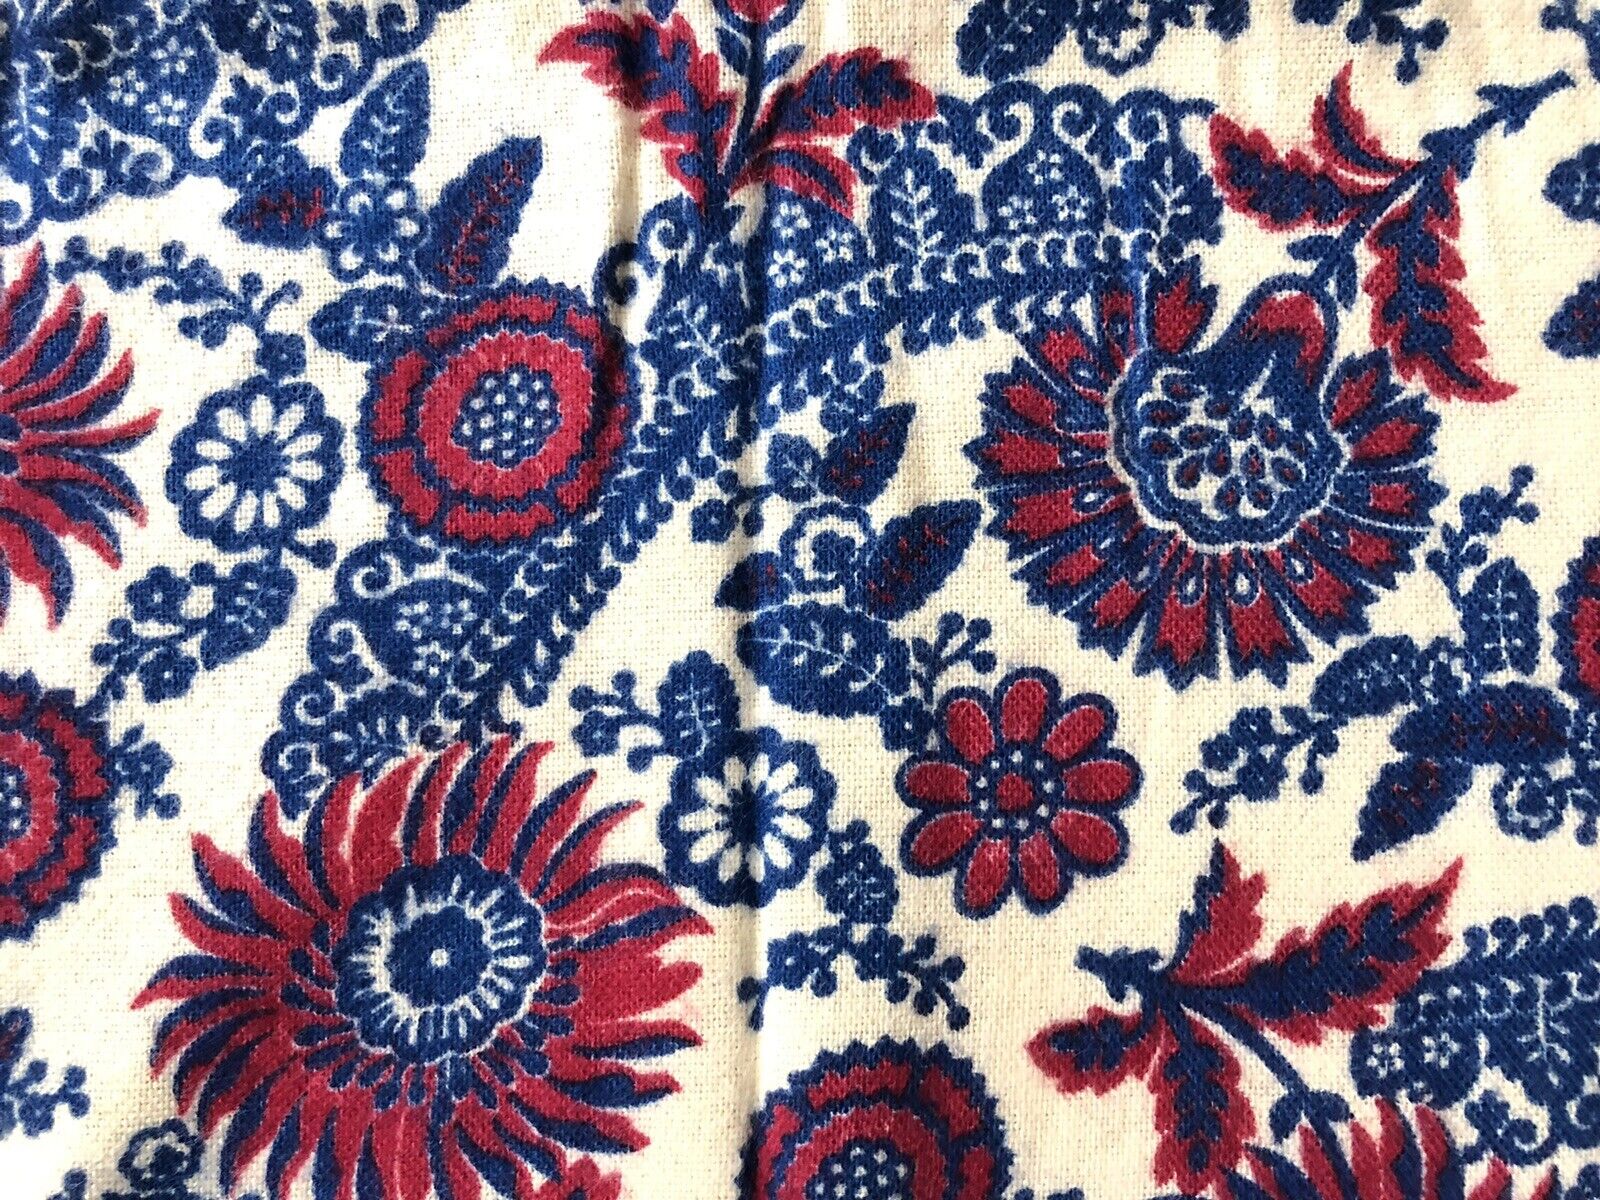 Vtg Wool Floral Jacquard Fabric 90 x 43 Abstract Red Blue Paisley Jacobean Print